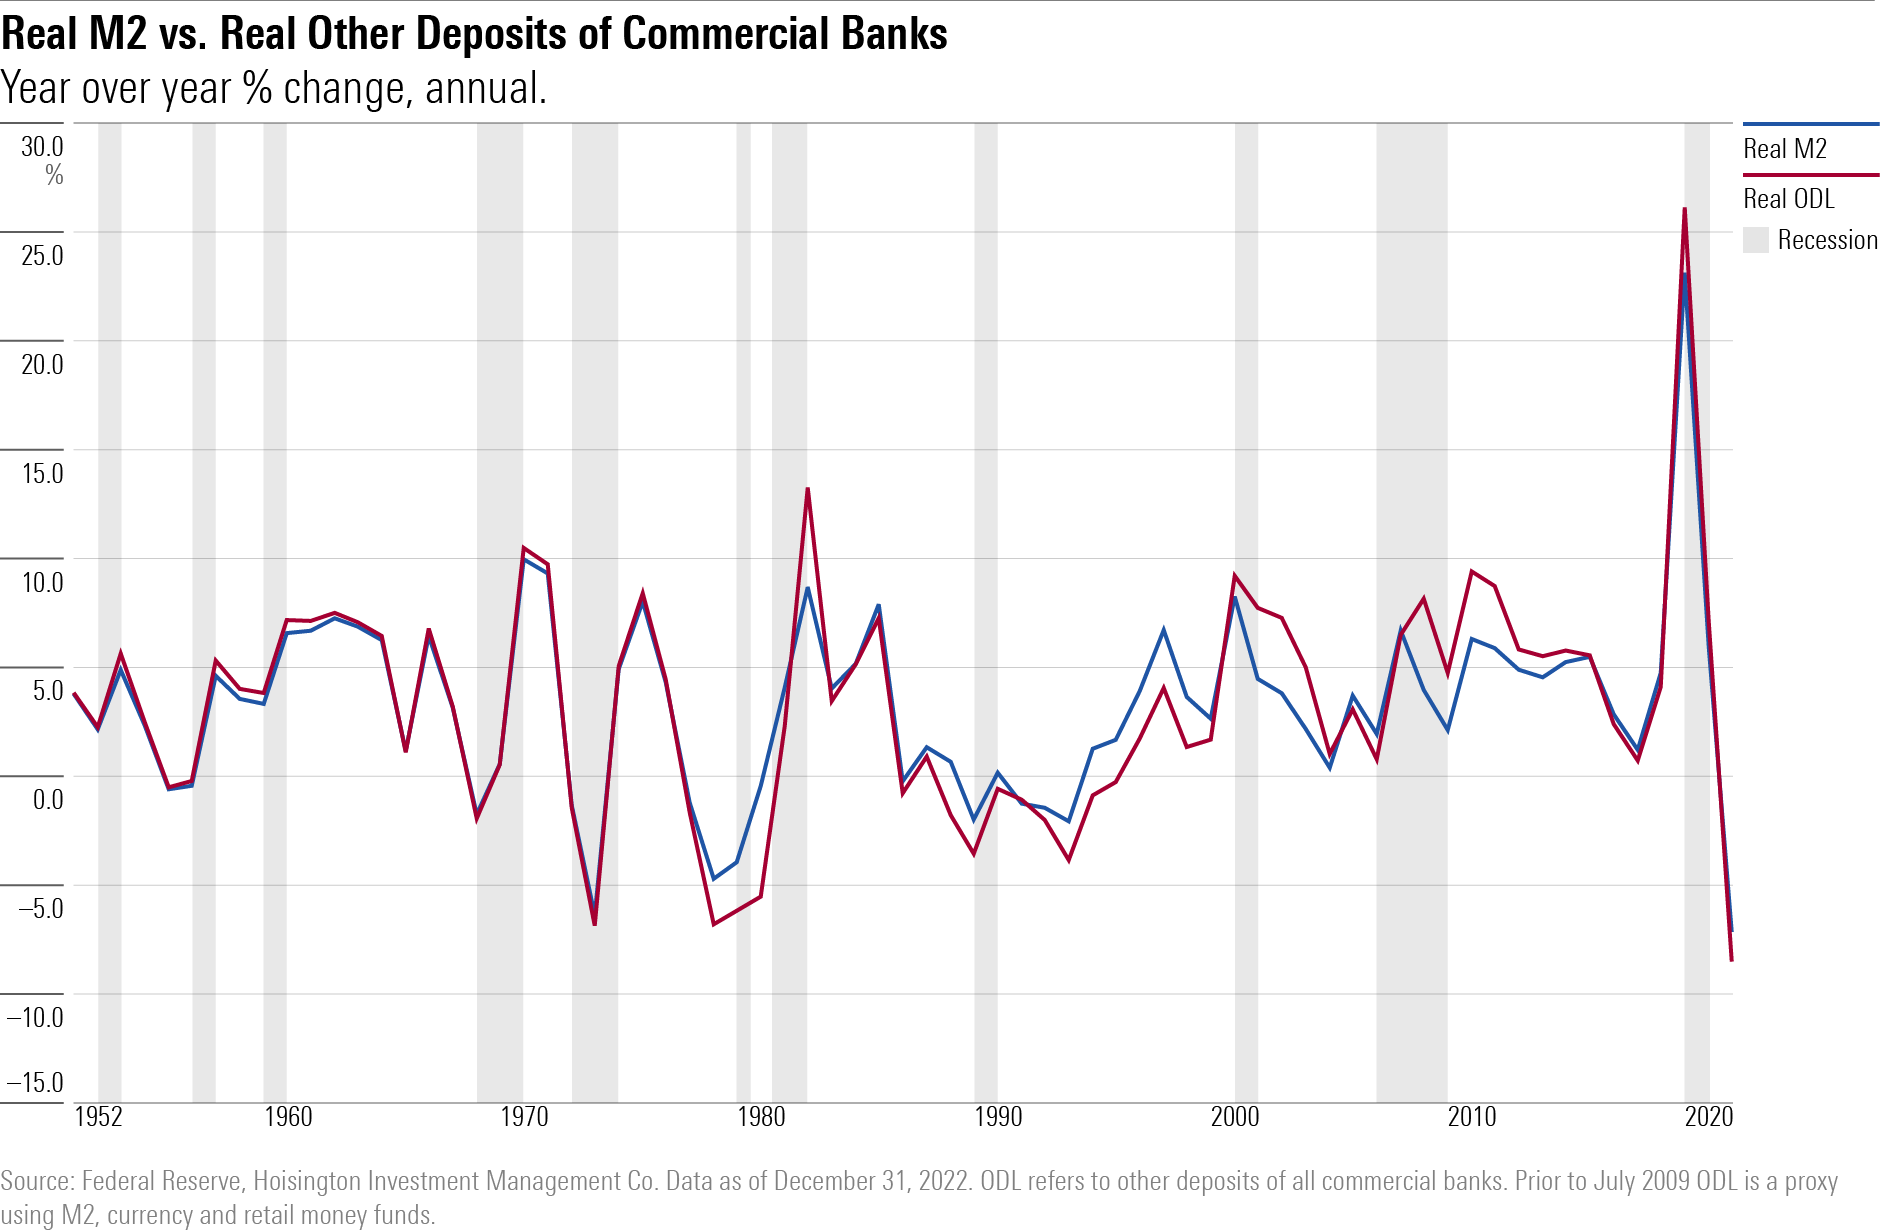 Line chart showing Real M2 vs. Real Other Deposits of Commercial Banks